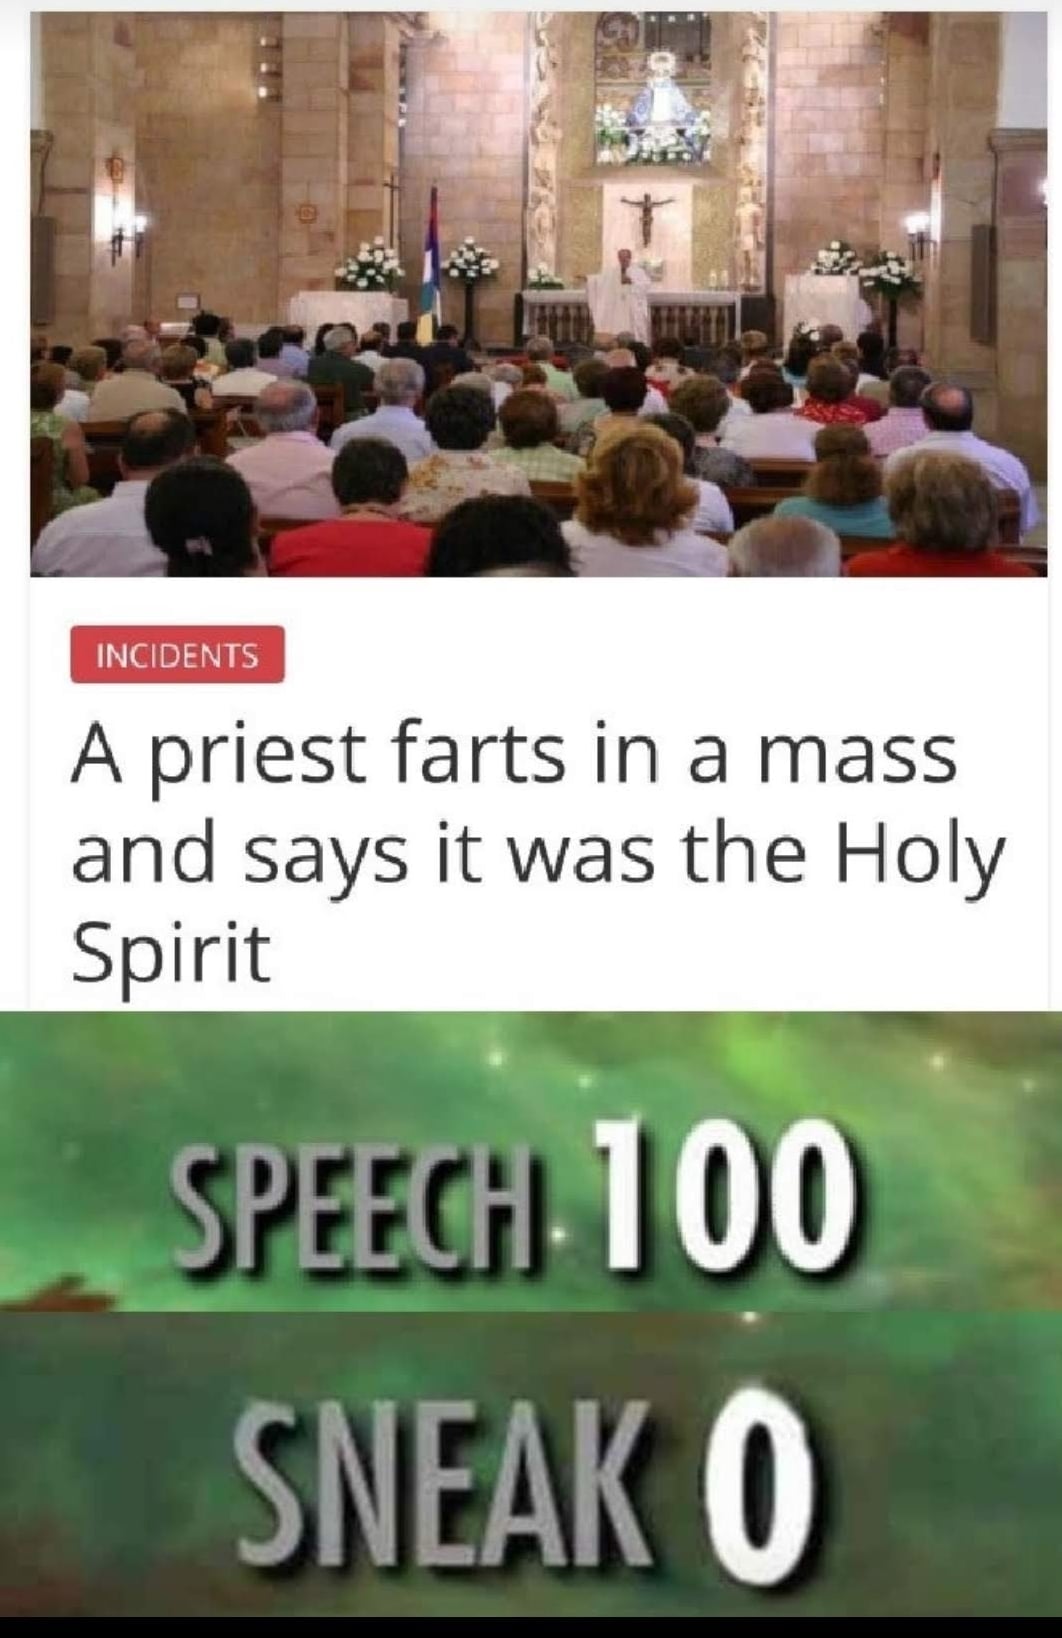 christian christian-memes christian text: INCIDENTS A priest farts in a mass and says it was the Holy Spirit SNEAK O 